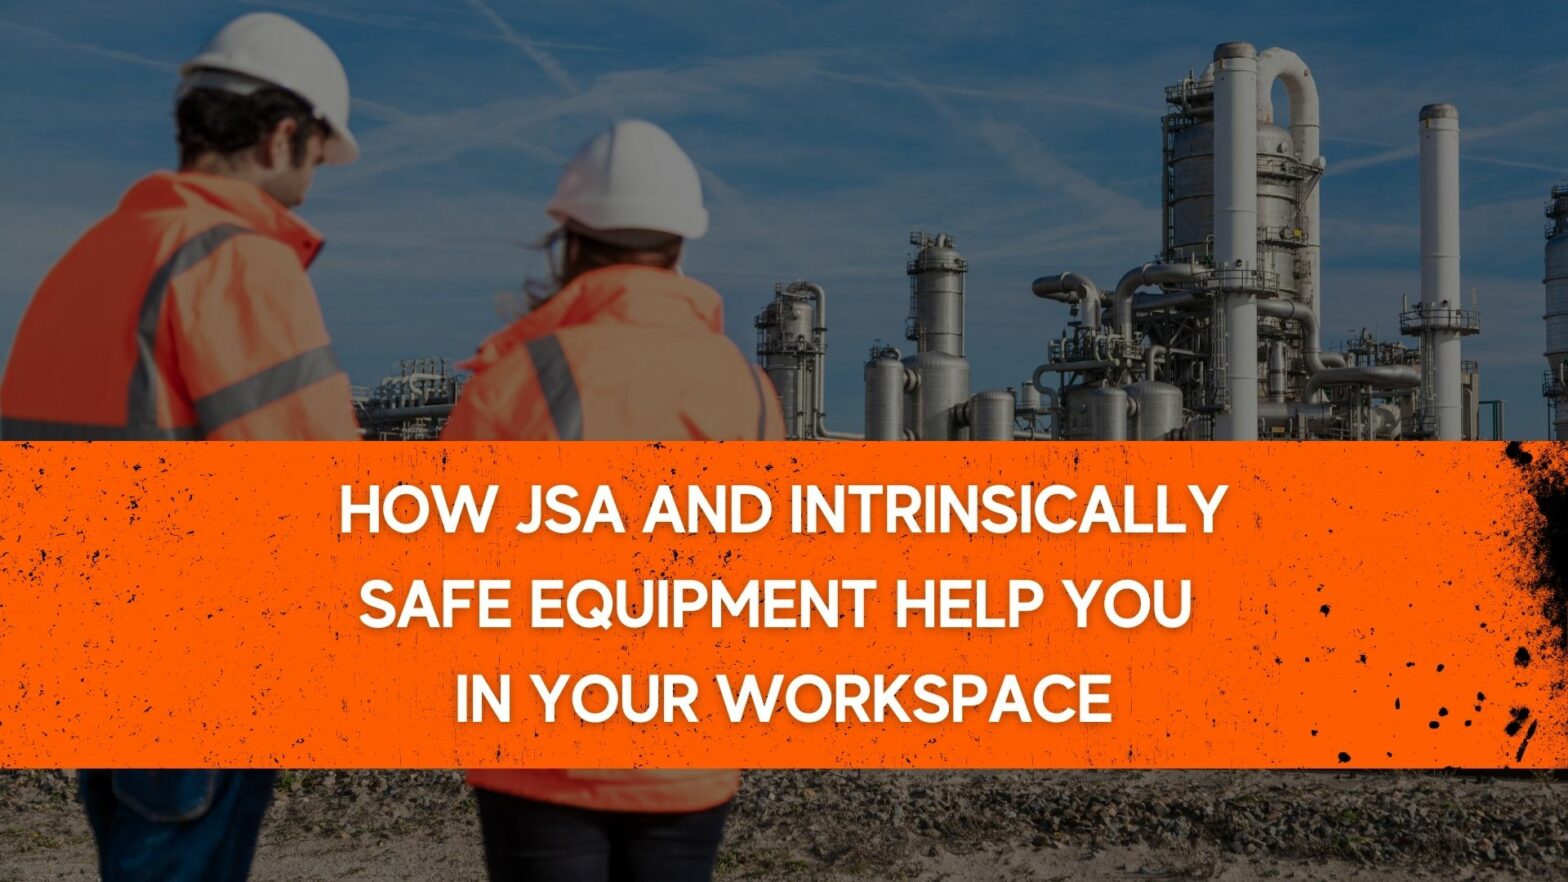 How JSA and Intrinsically safe equipment help you in your workspace